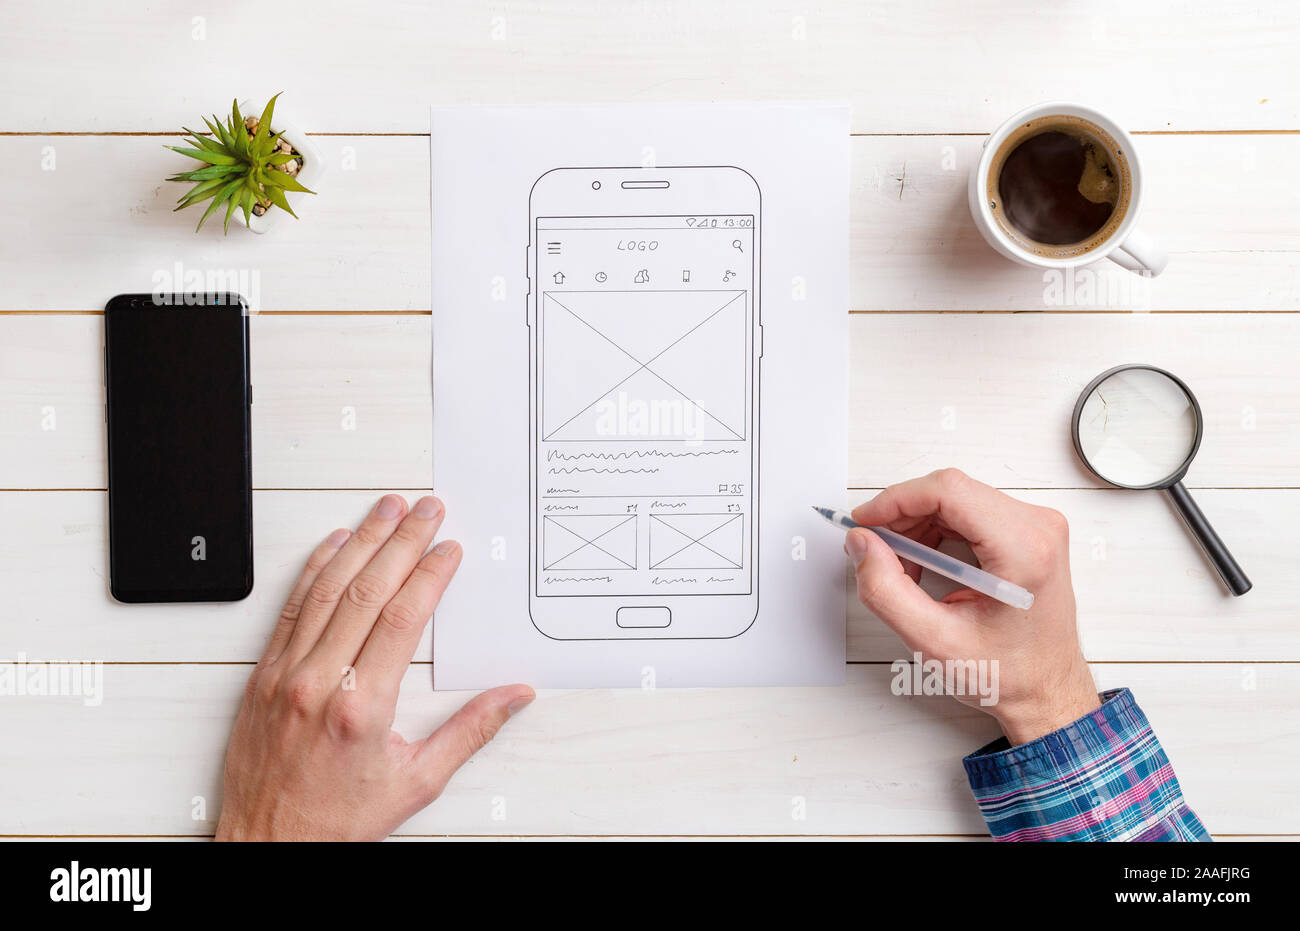 The web designer sketches the user interface on the wireframe of the mobile phone. Work desk, top view, flat lay comosition. Stock Photo